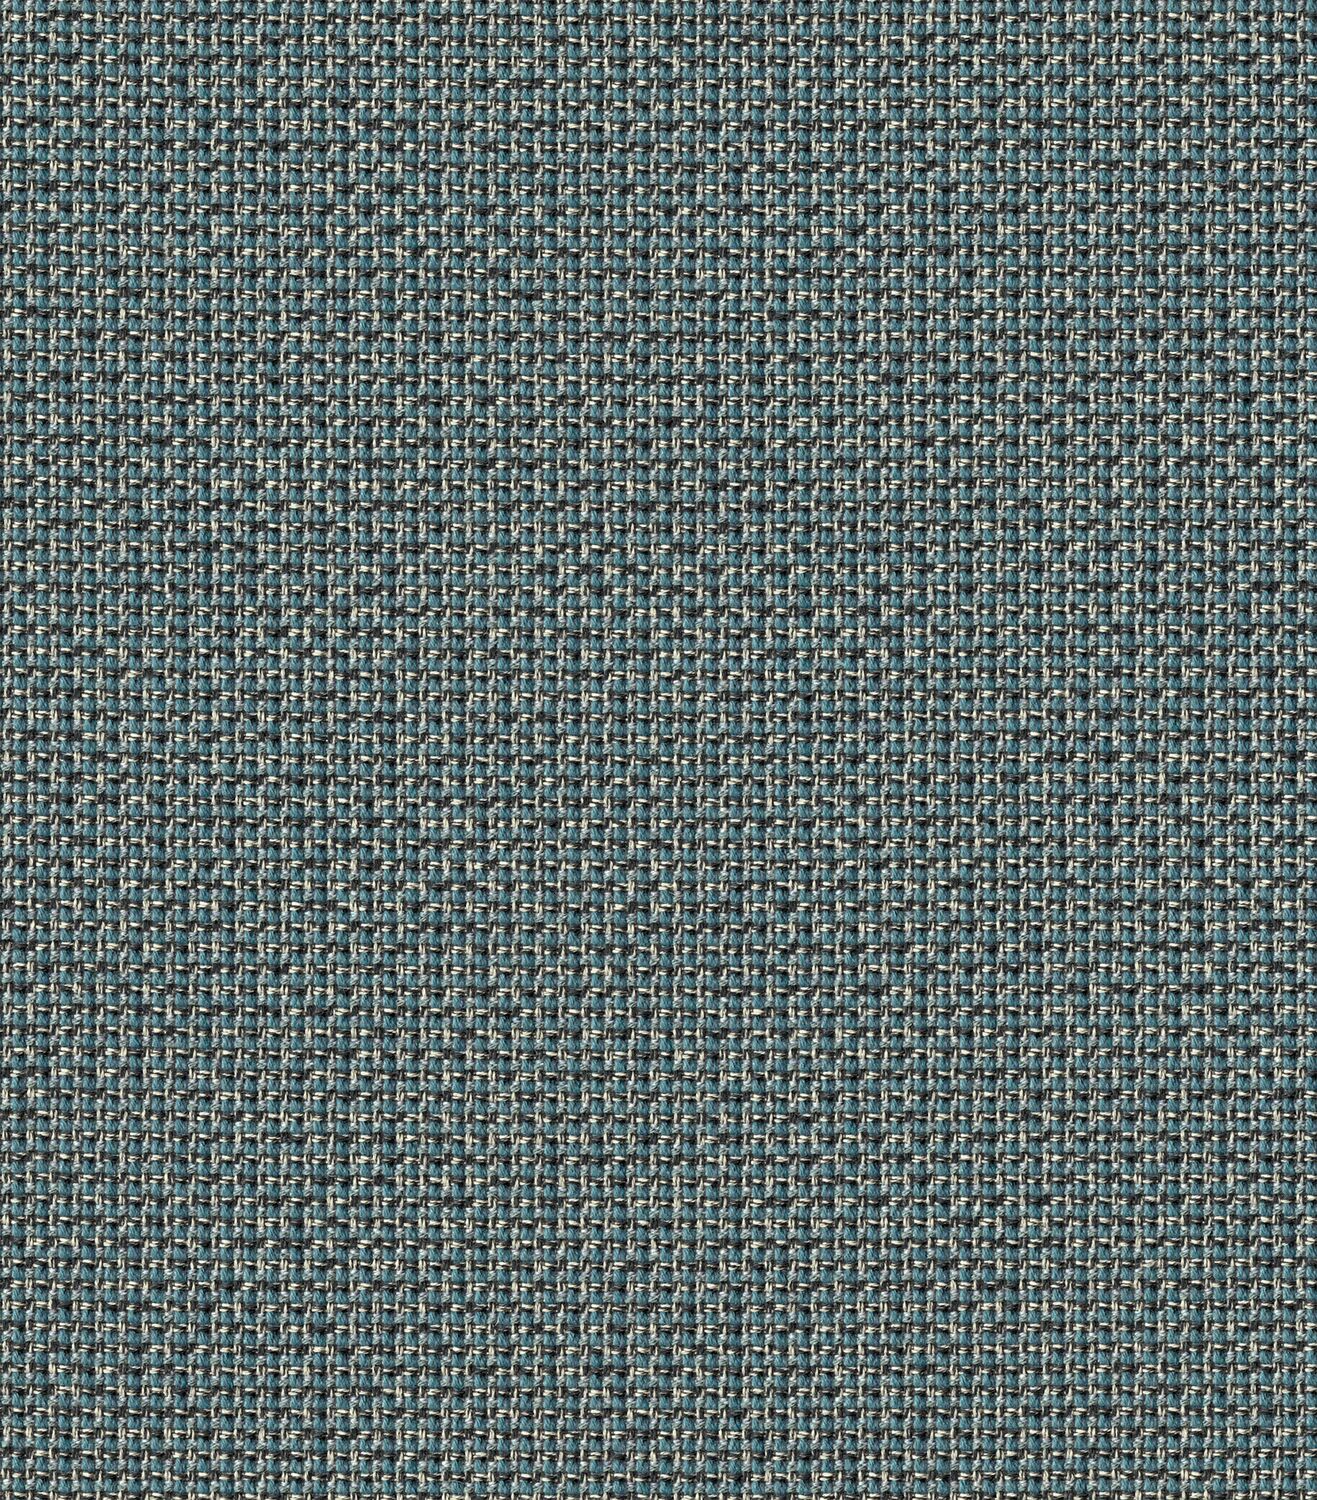 Barberpole Basket - Meander - 4114 - 11 Tileable Swatches